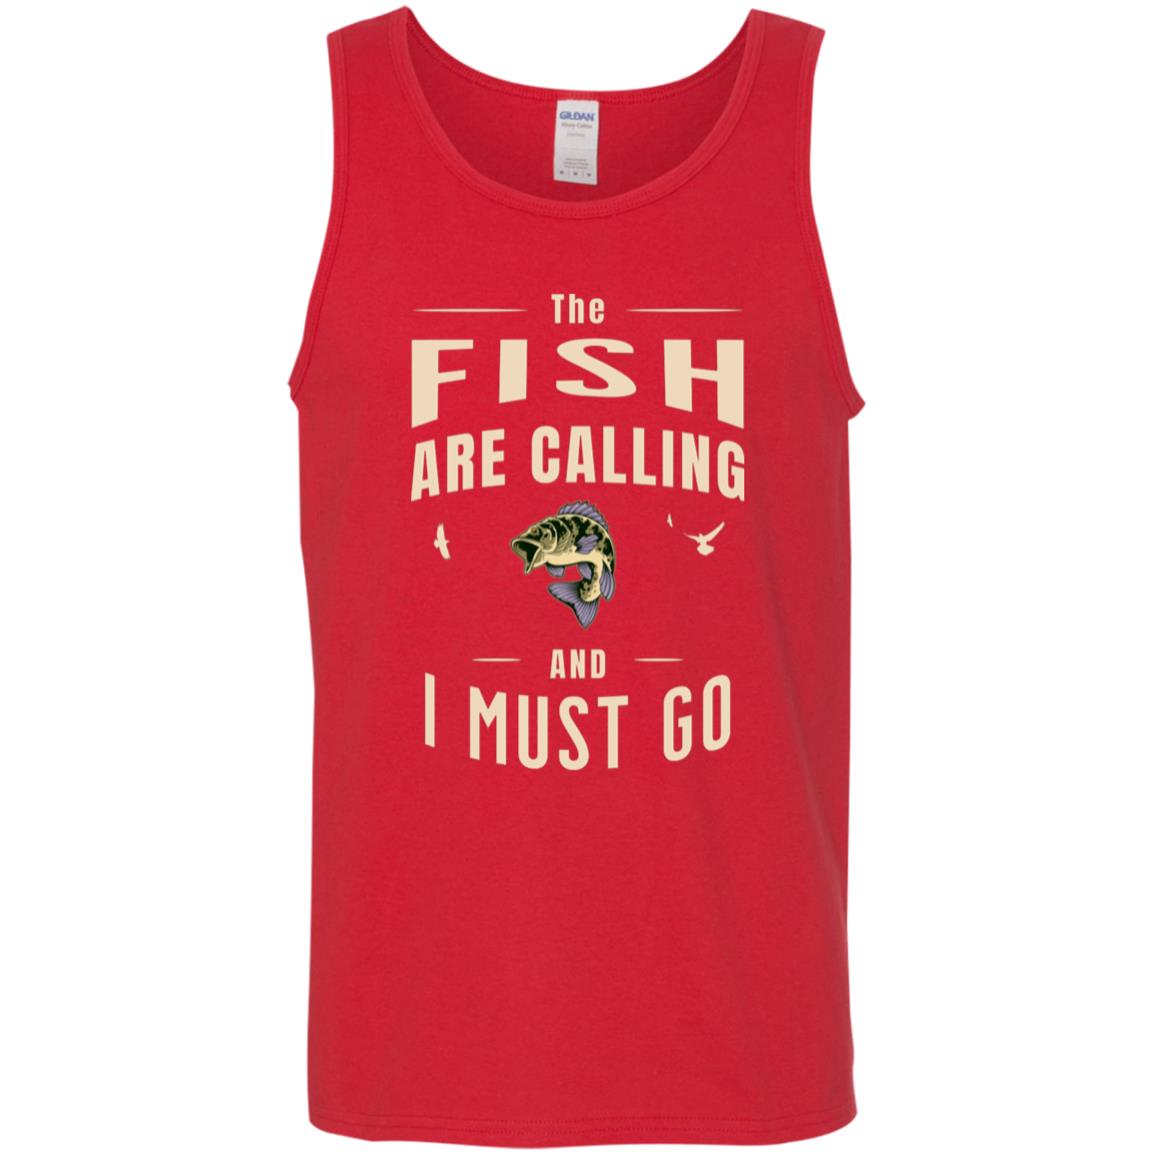 The fish are calling and I must go tank top k red